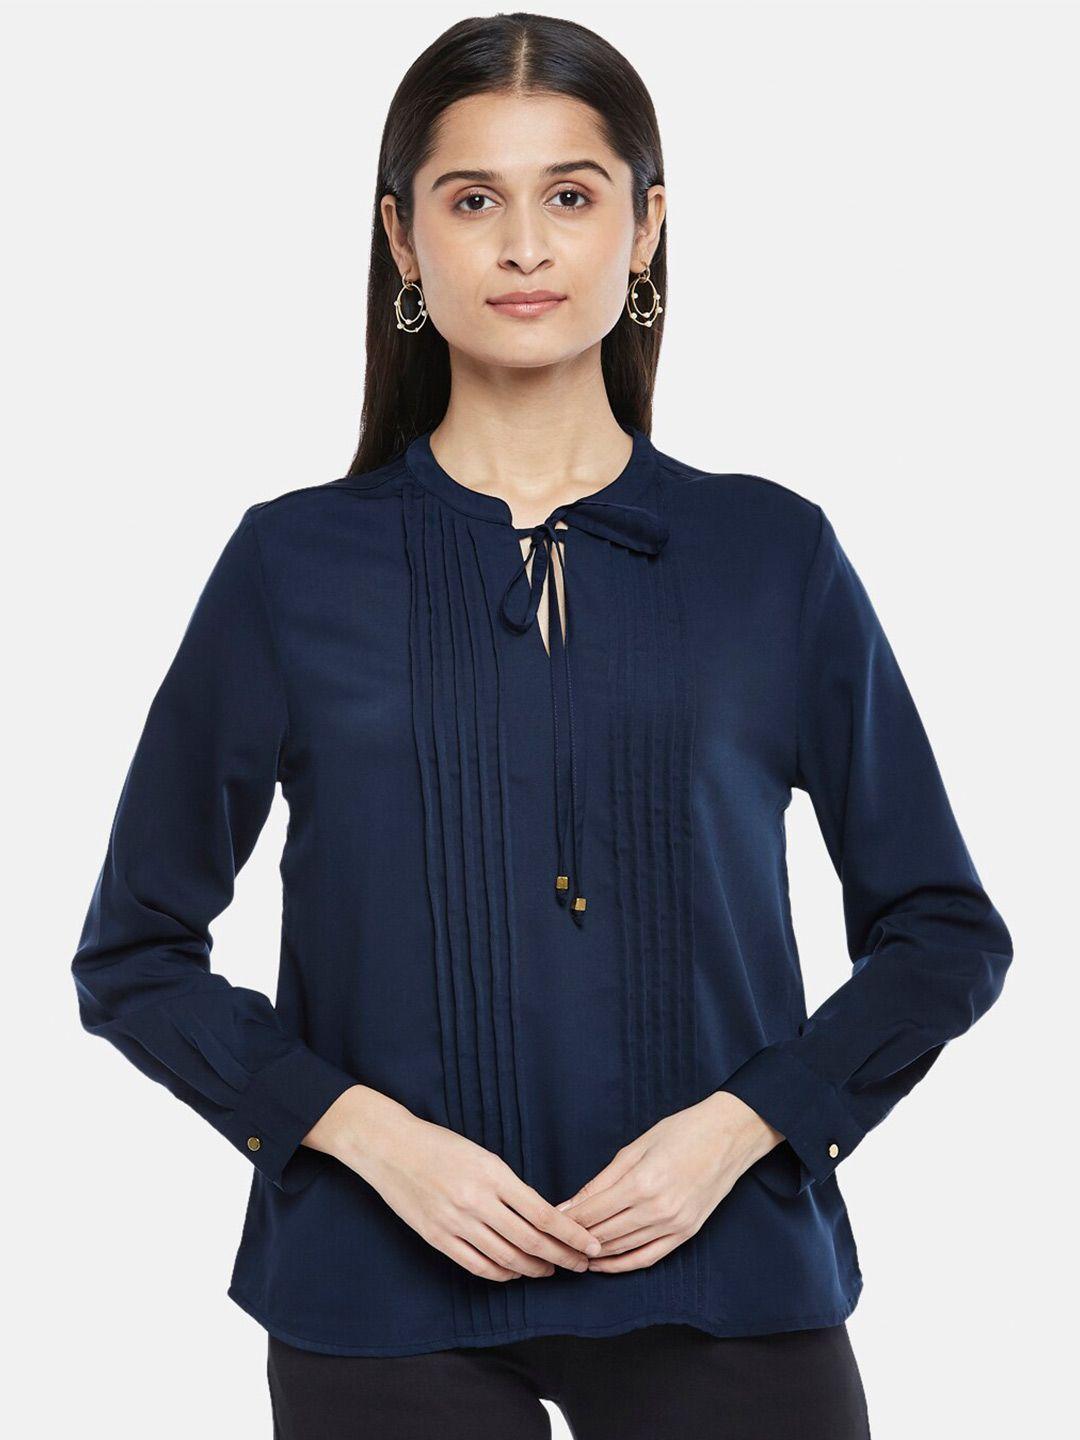 annabelle-by-pantaloons-navy-blue-tie-up-neck-shirt-style-top